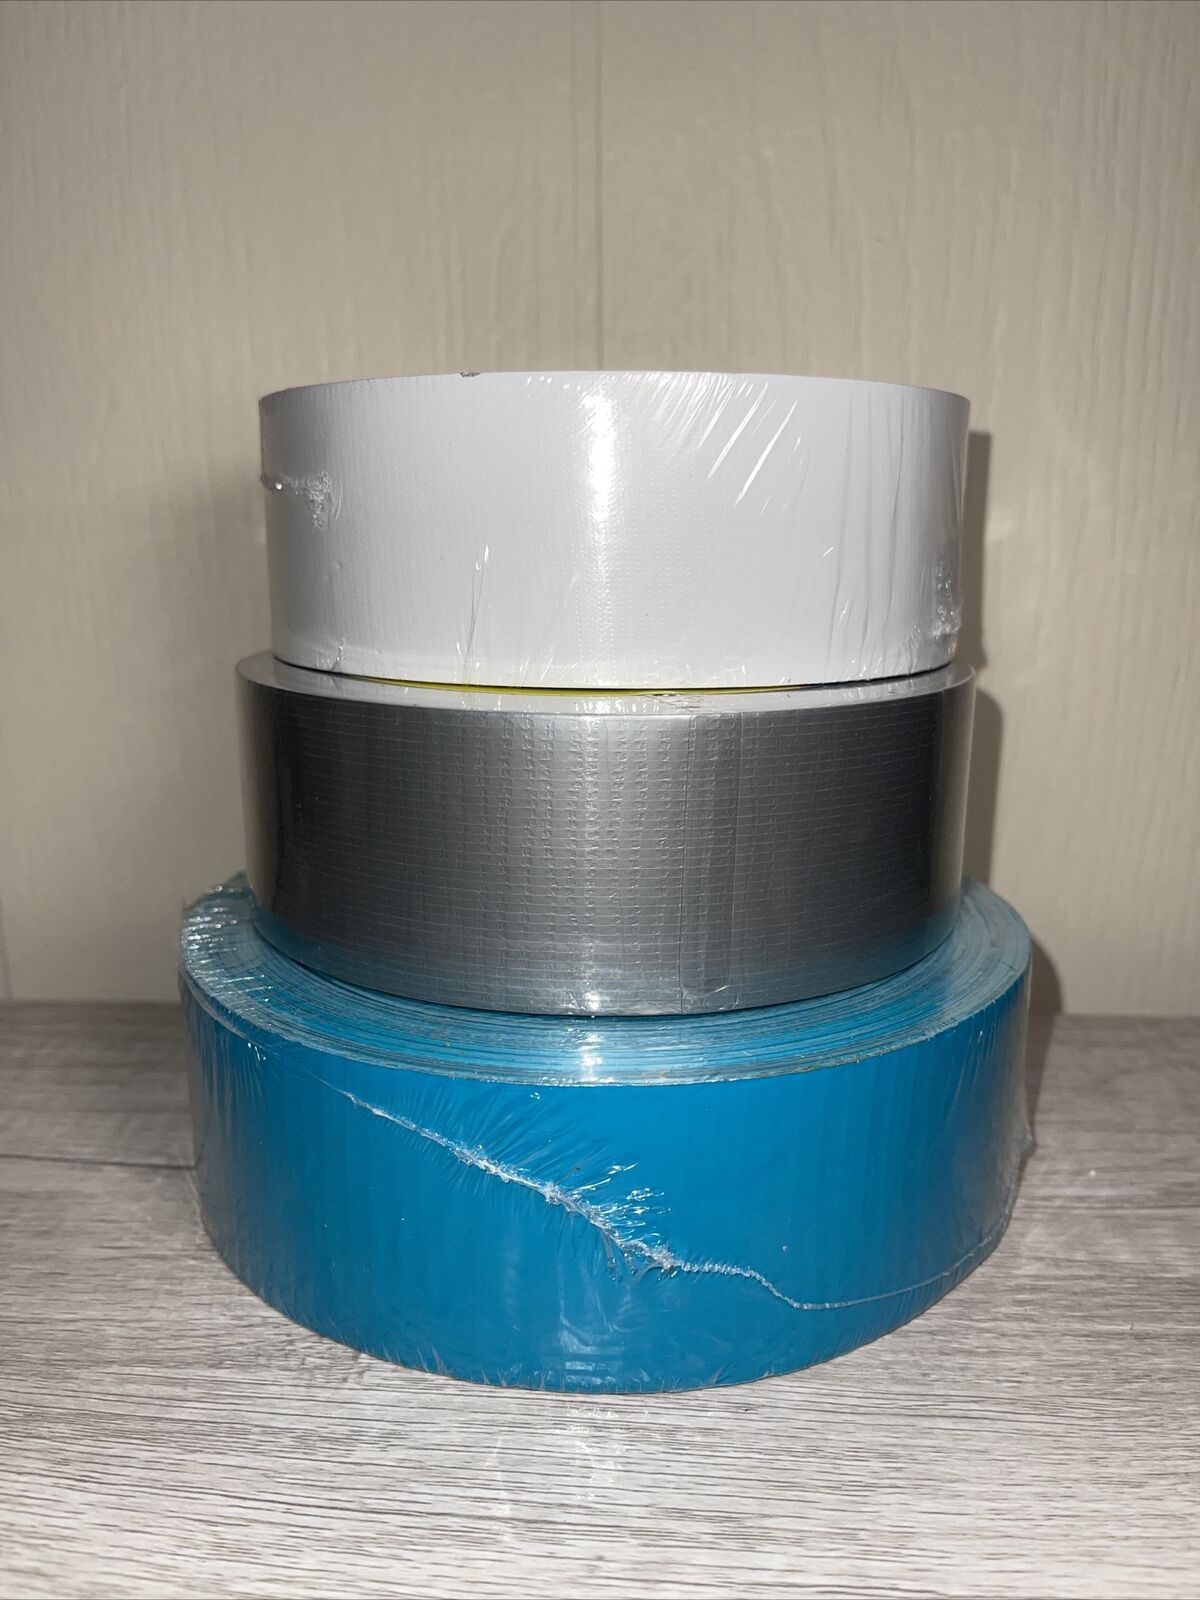 150 Yards of  Duct Tape - 3 Pack Variety - Tape it & Heavy Duty Construx